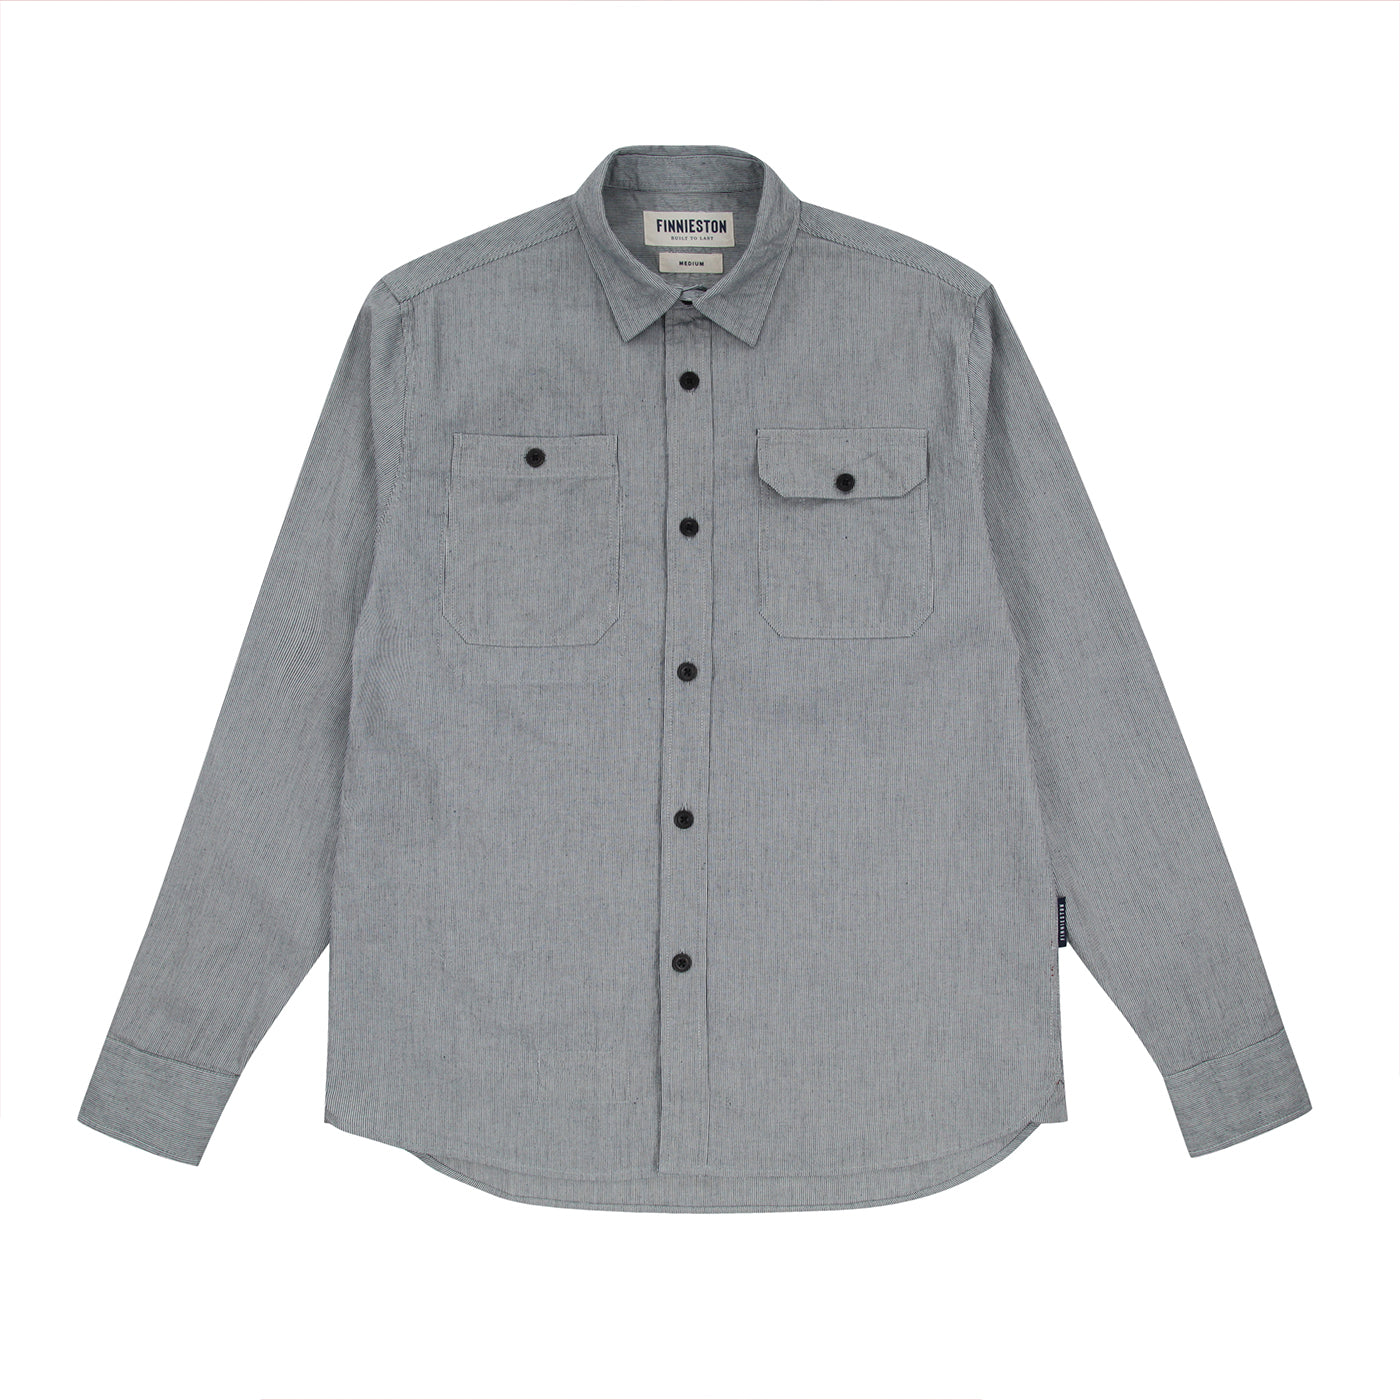 ANDERSTON OVER SHIRT